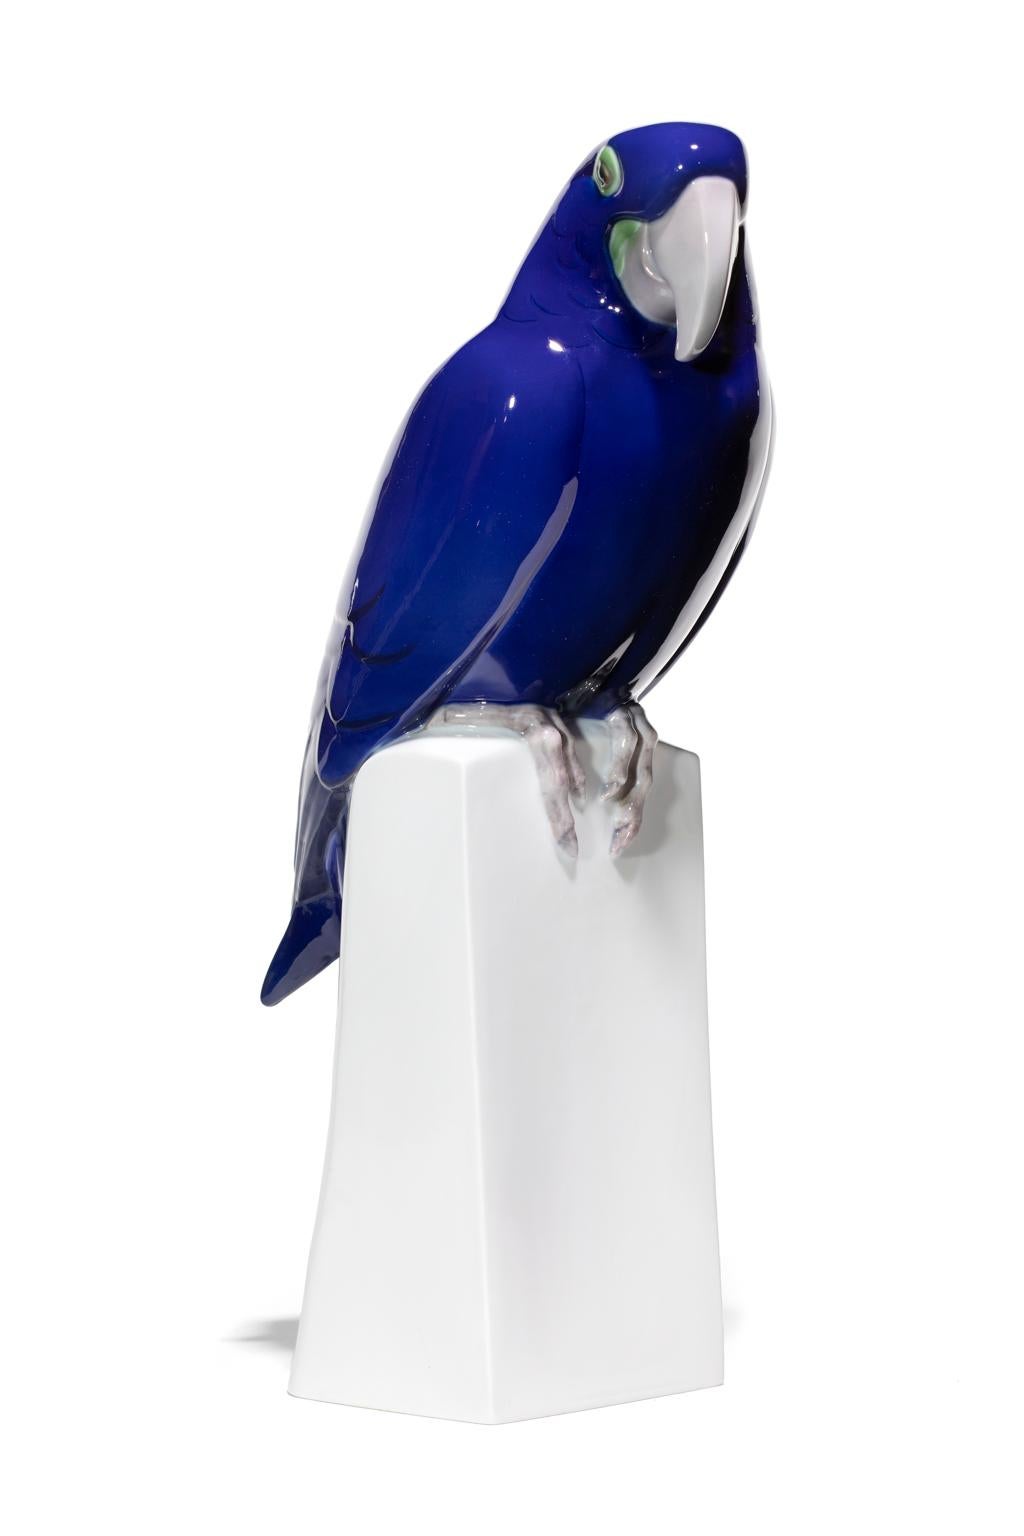 Blue Parrot on its perch appears to be the perfect companion. Its attention is perked and it looks as if it is about to begin a conversation about a cracker you may be holding. It comes across as friendly and strong and the intense blue of the glaze